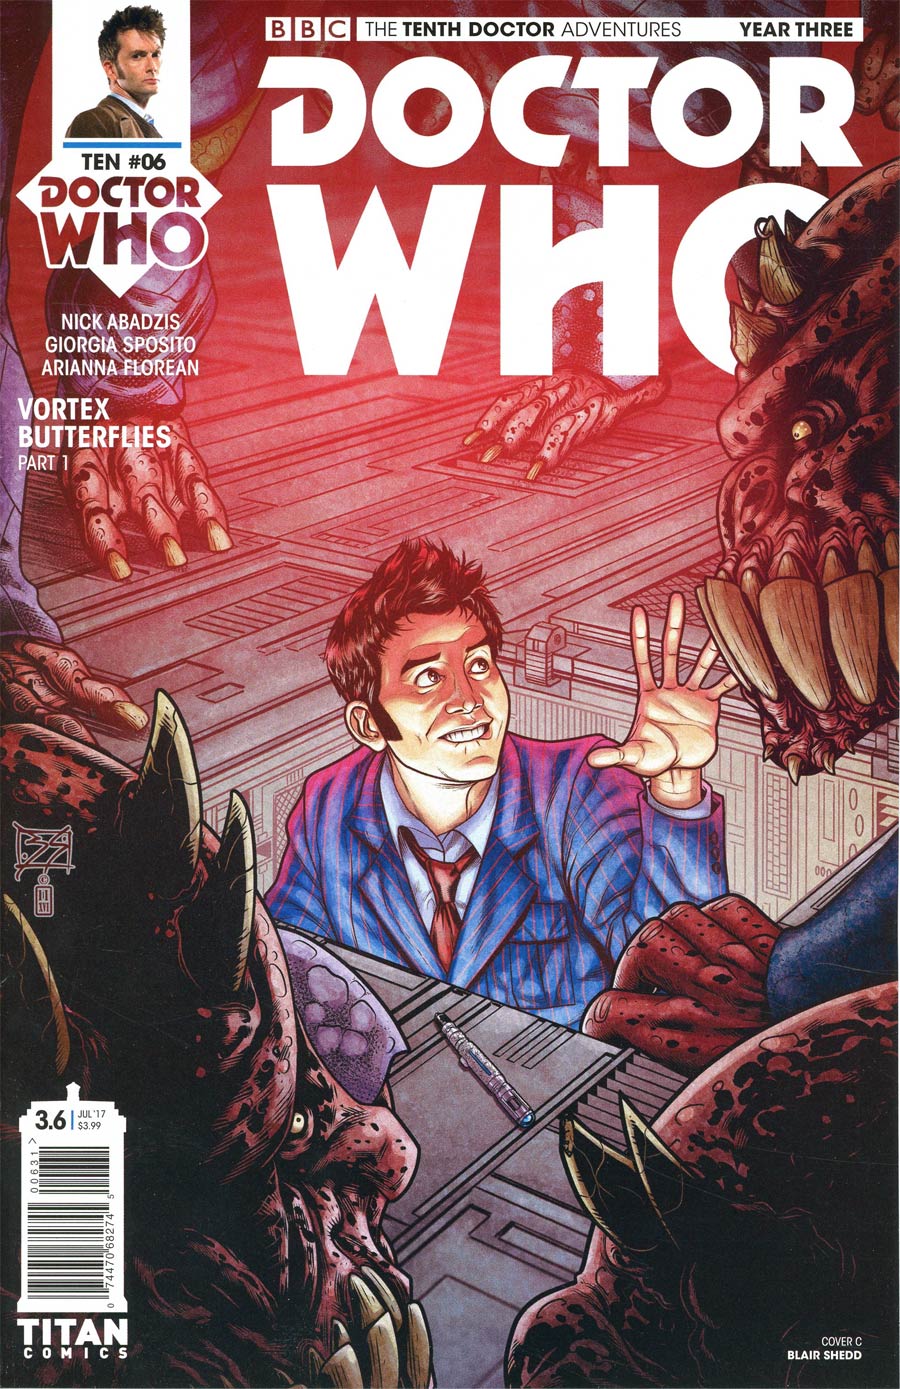 Doctor Who 10th Doctor Year Three #6 Cover C Variant Blair Shedd Cover